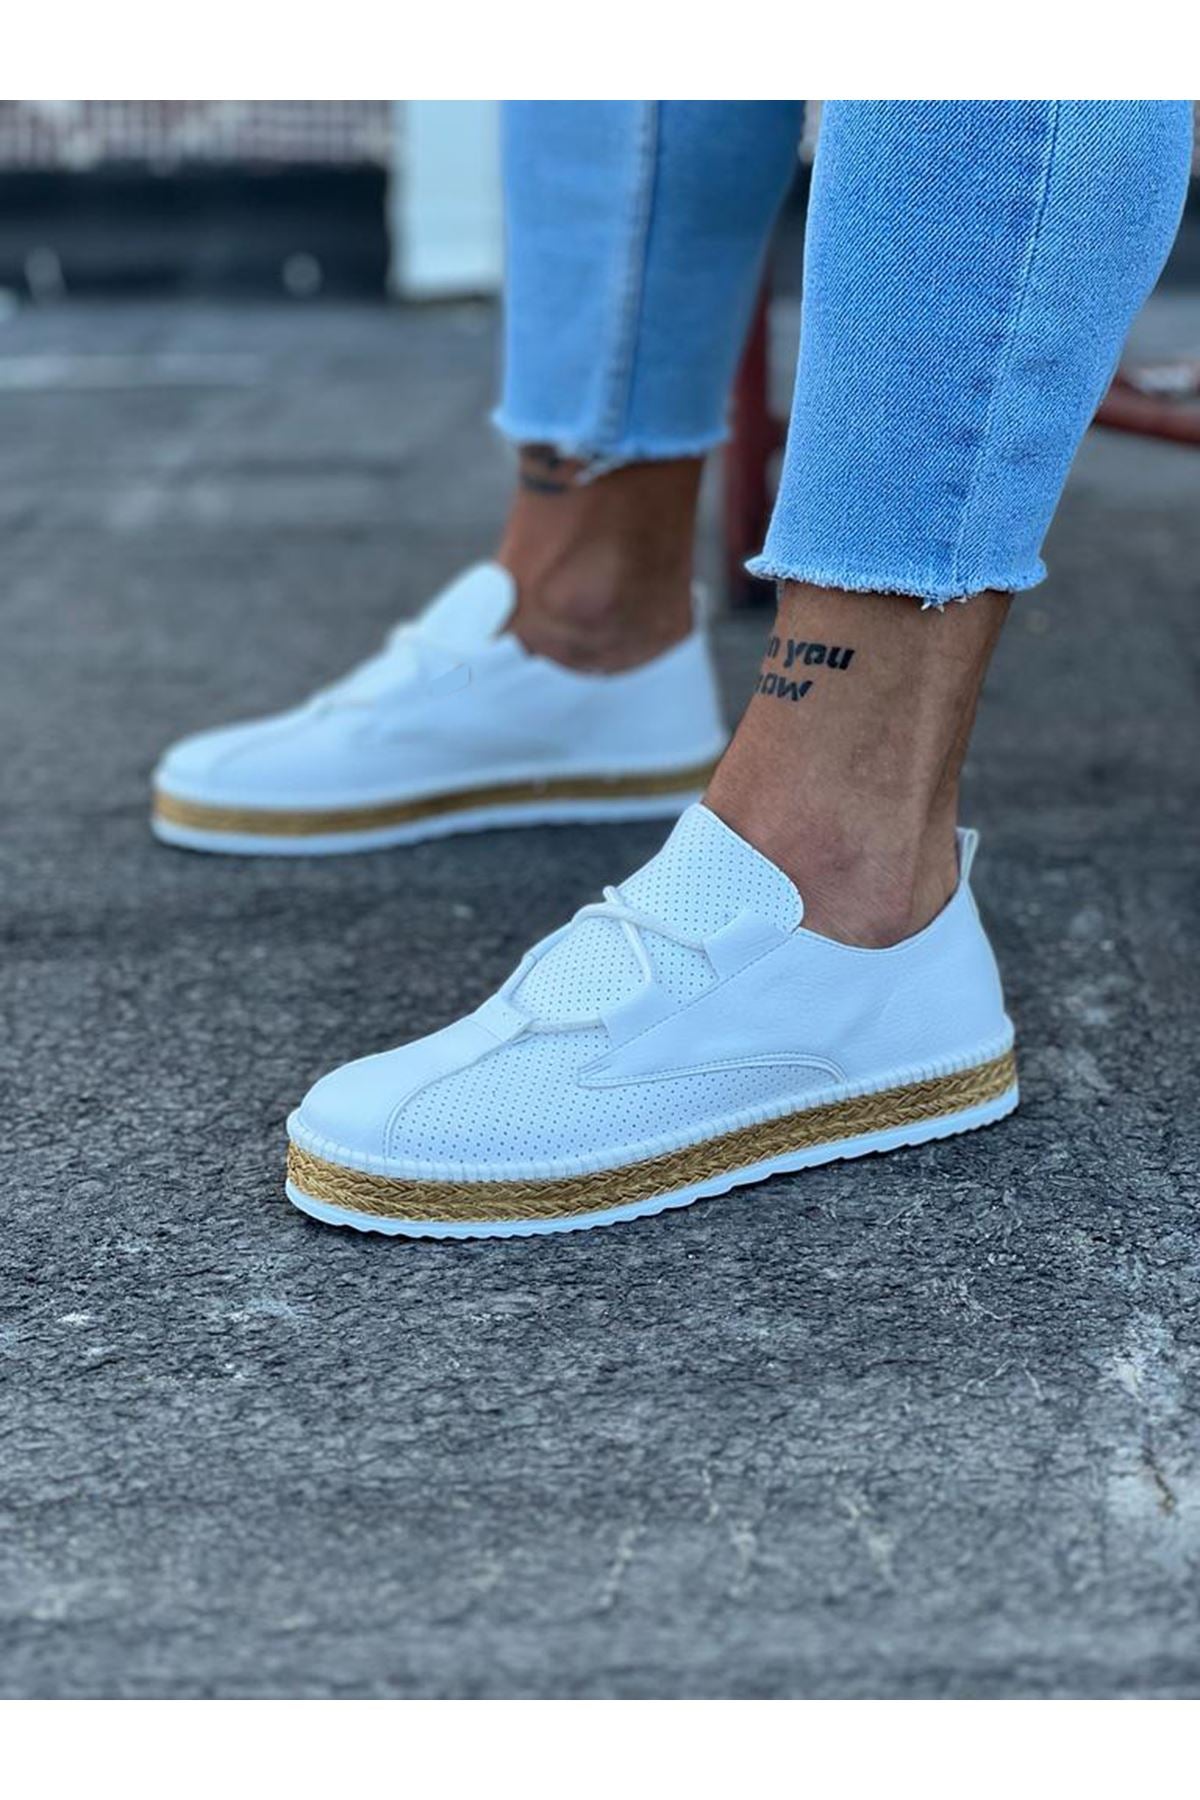 WG015 White Men's Casual Shoes - STREETMODE™